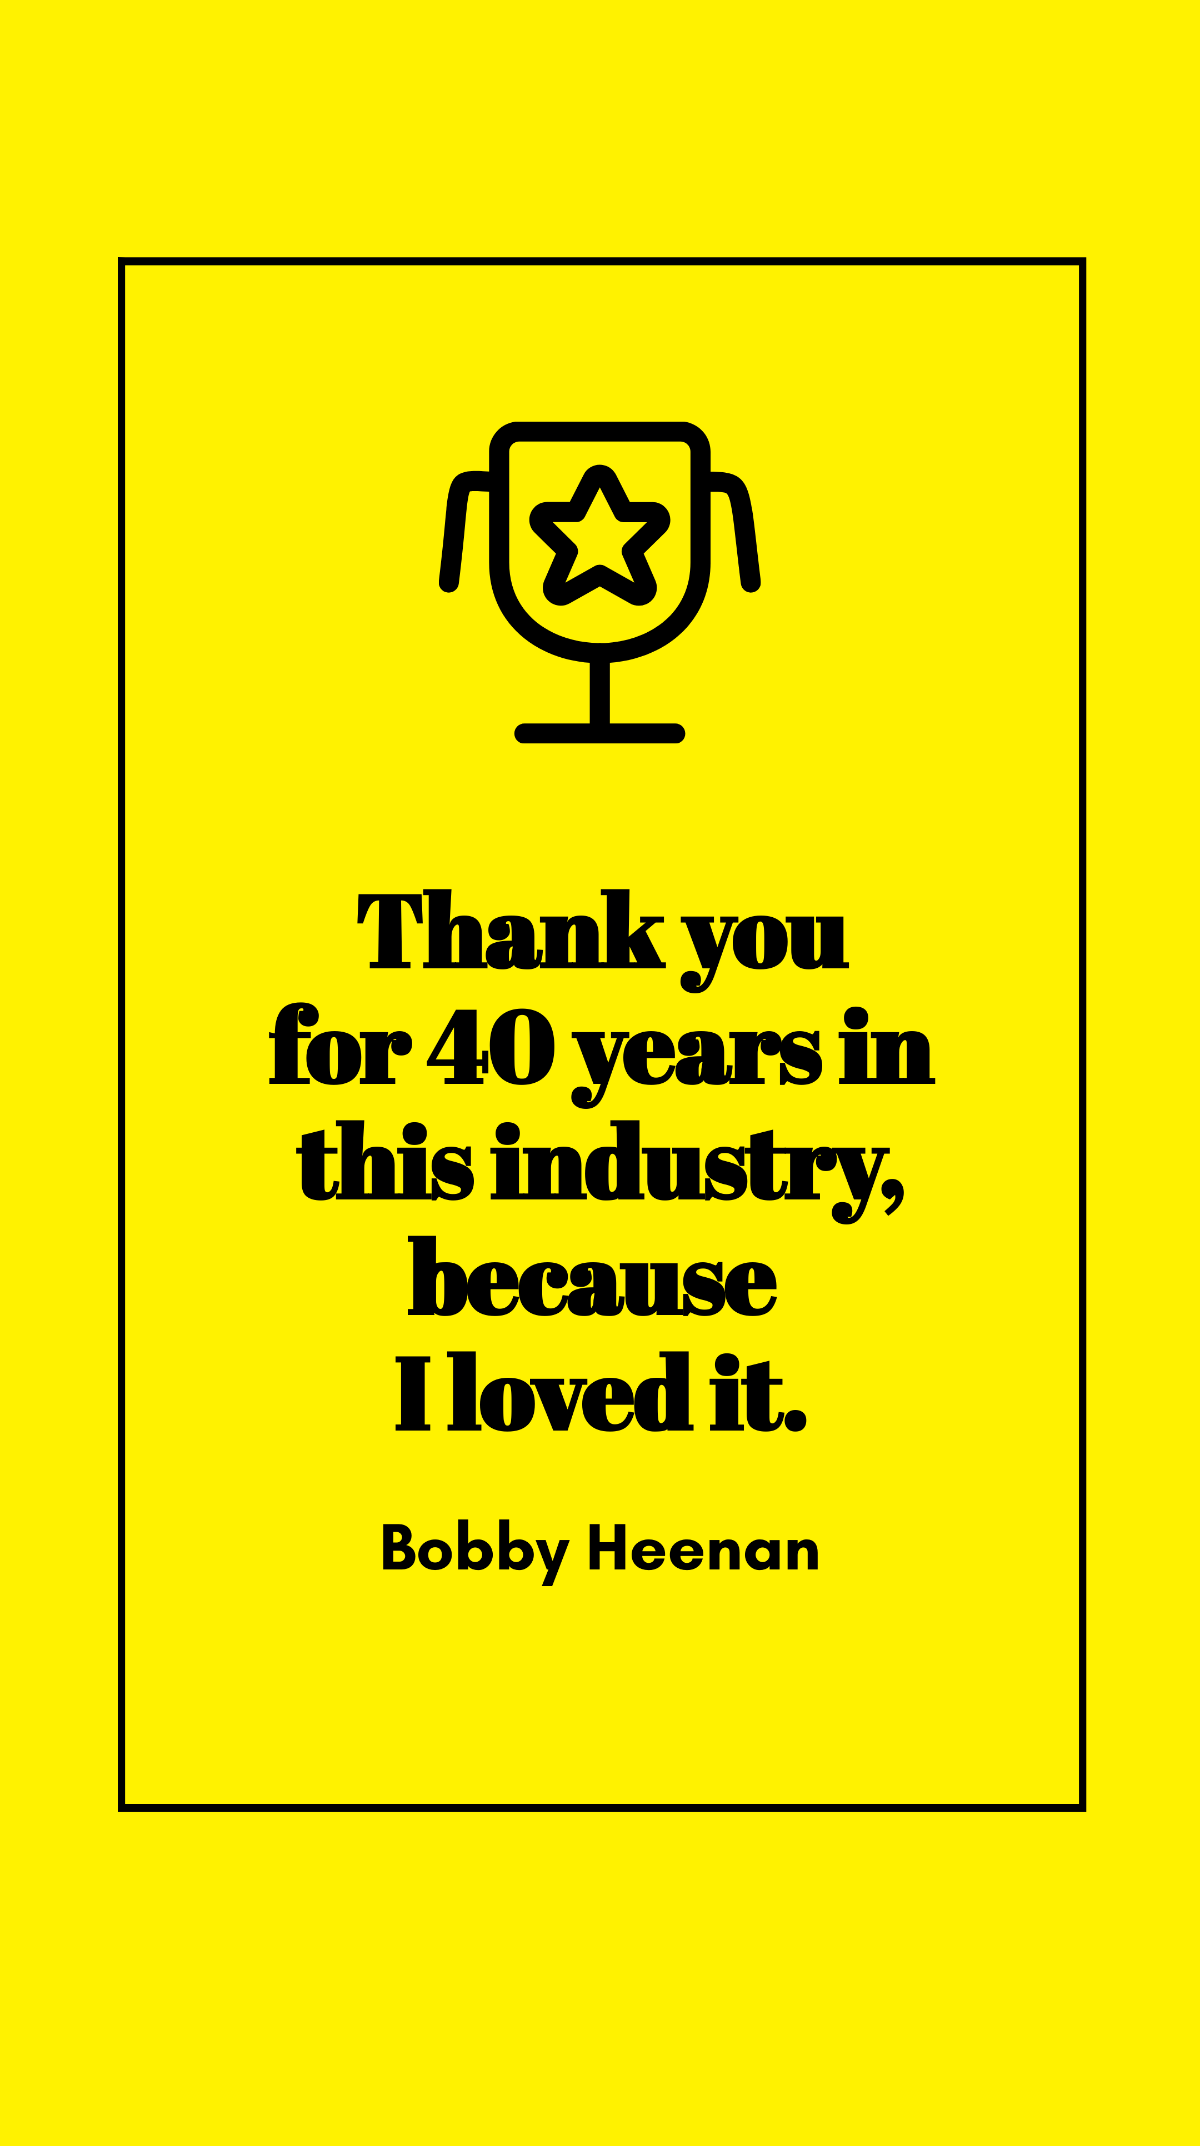 Bobby Heenan - Thank you for 40 years in this industry, because I loved it.